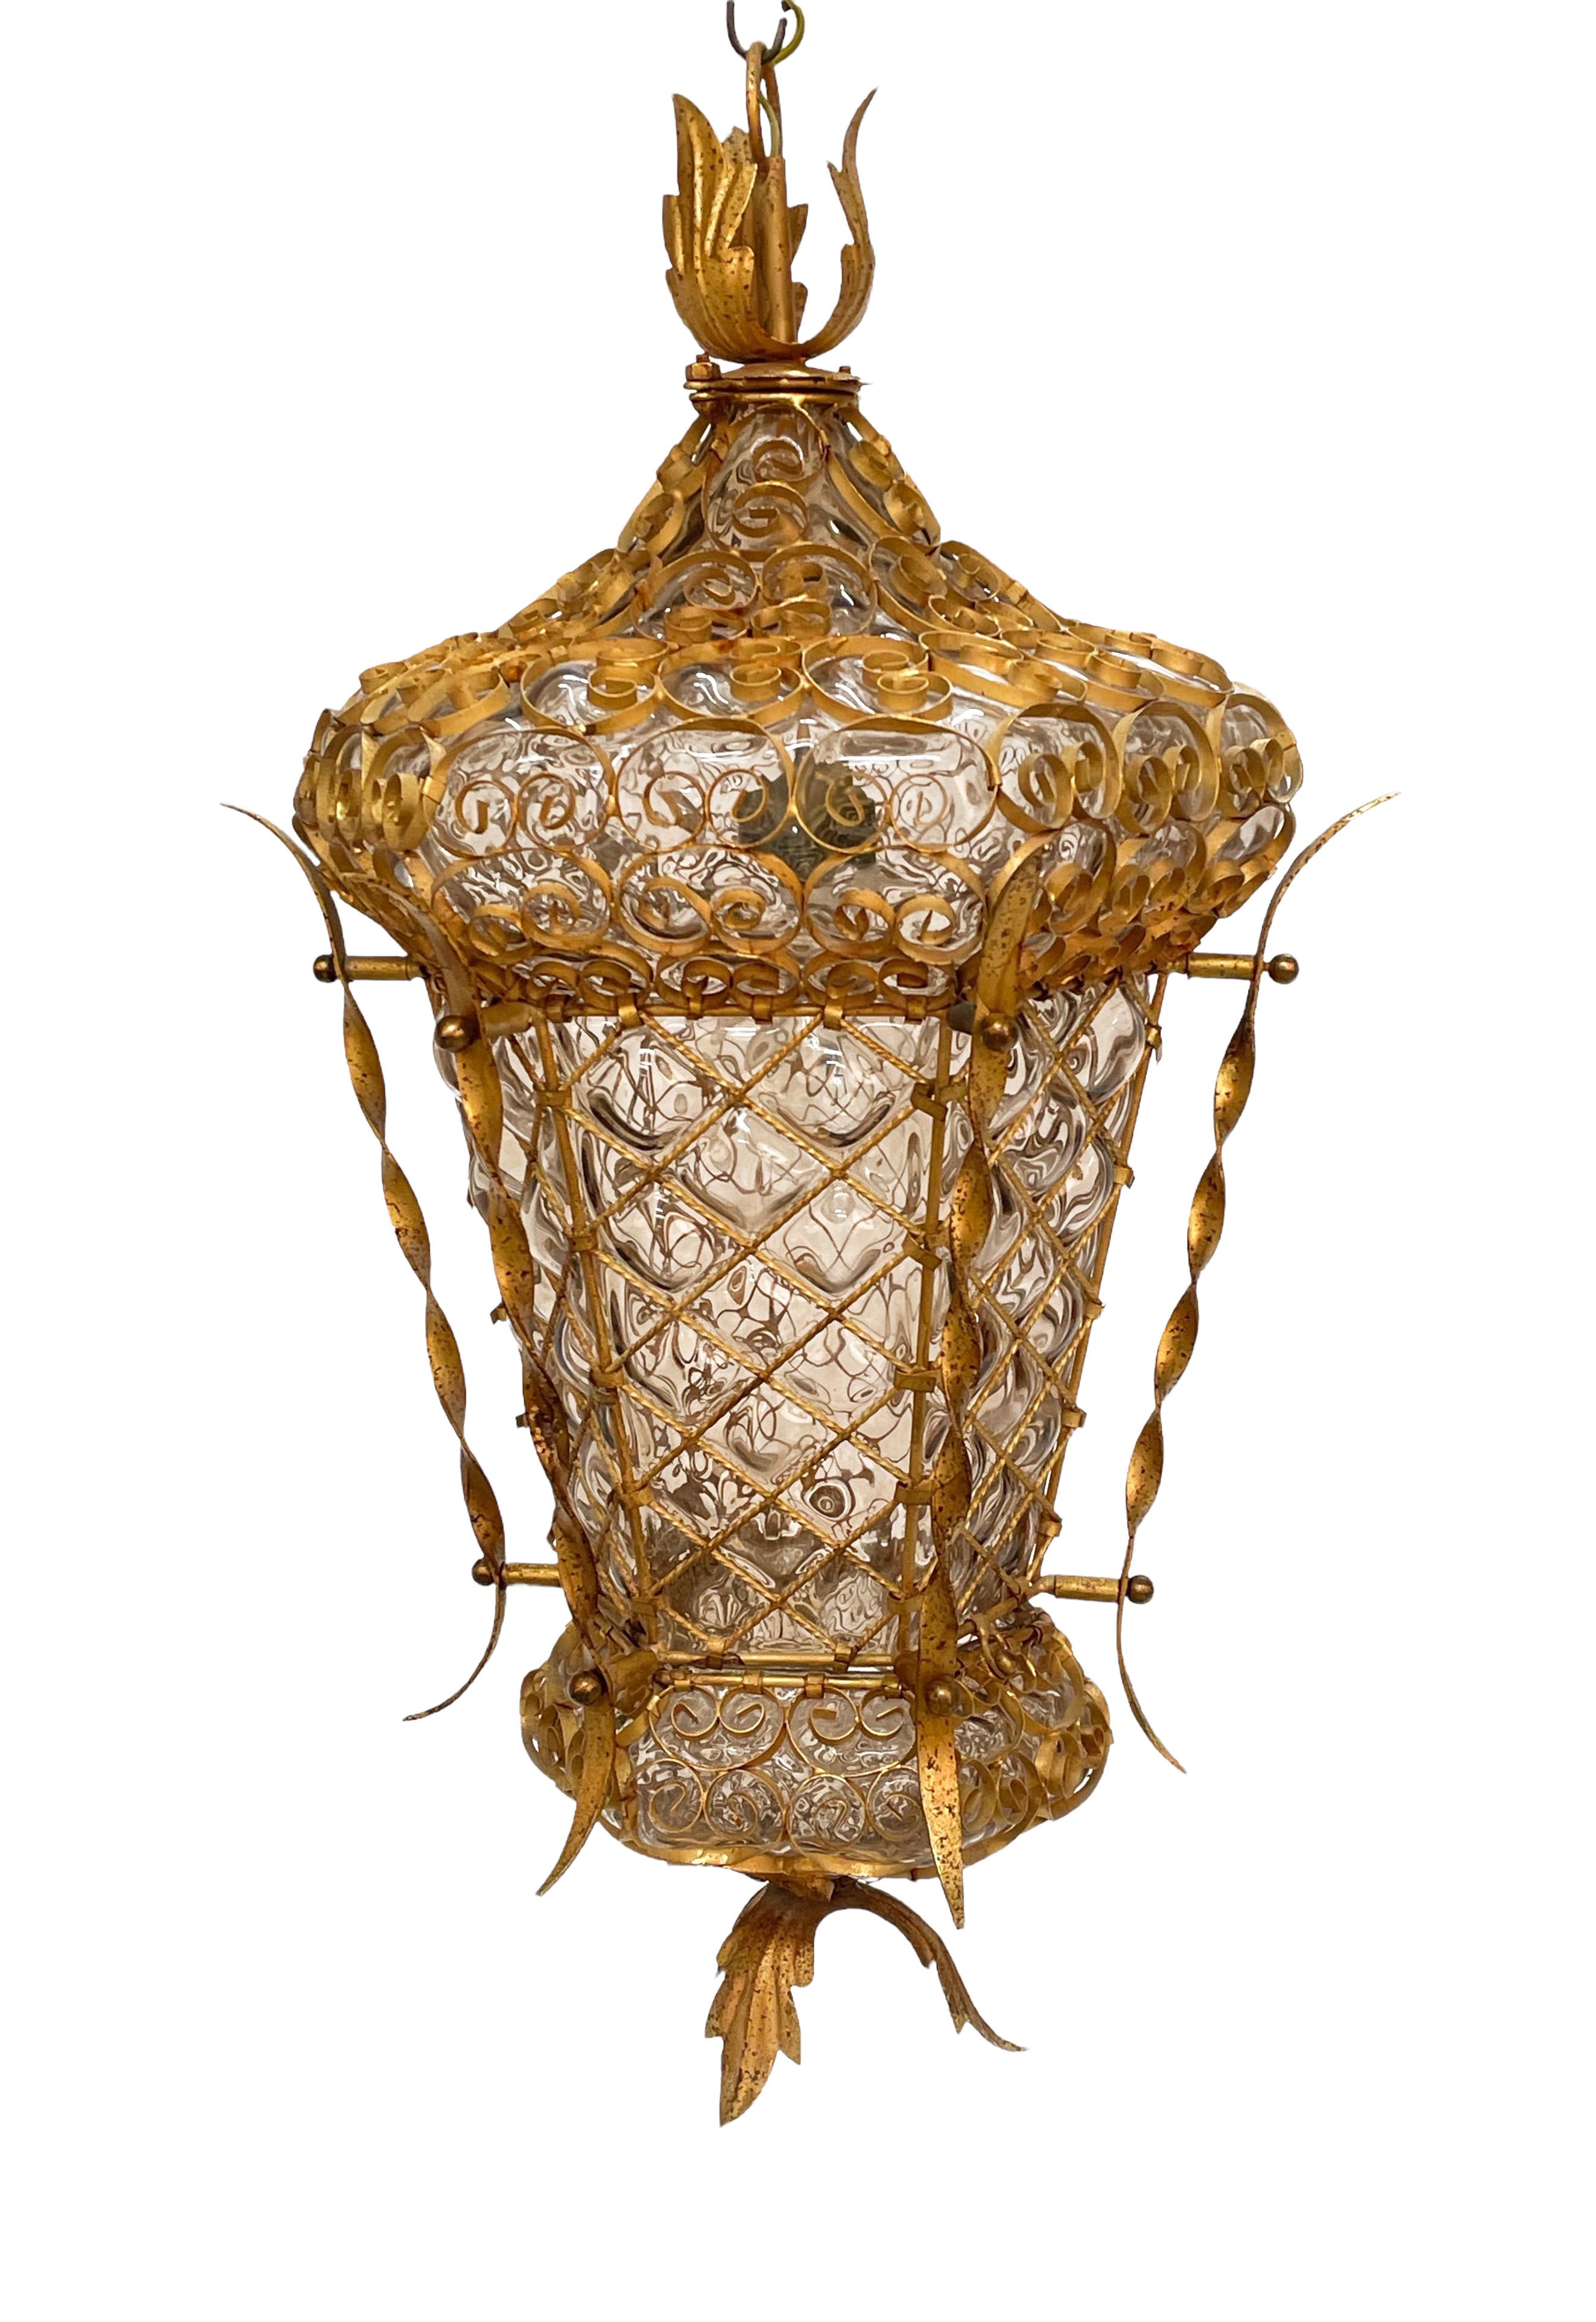 Midcentury Venetian Mouth Blown Glass in Gold Painted Metal Frame Lantern, 1940s For Sale 9